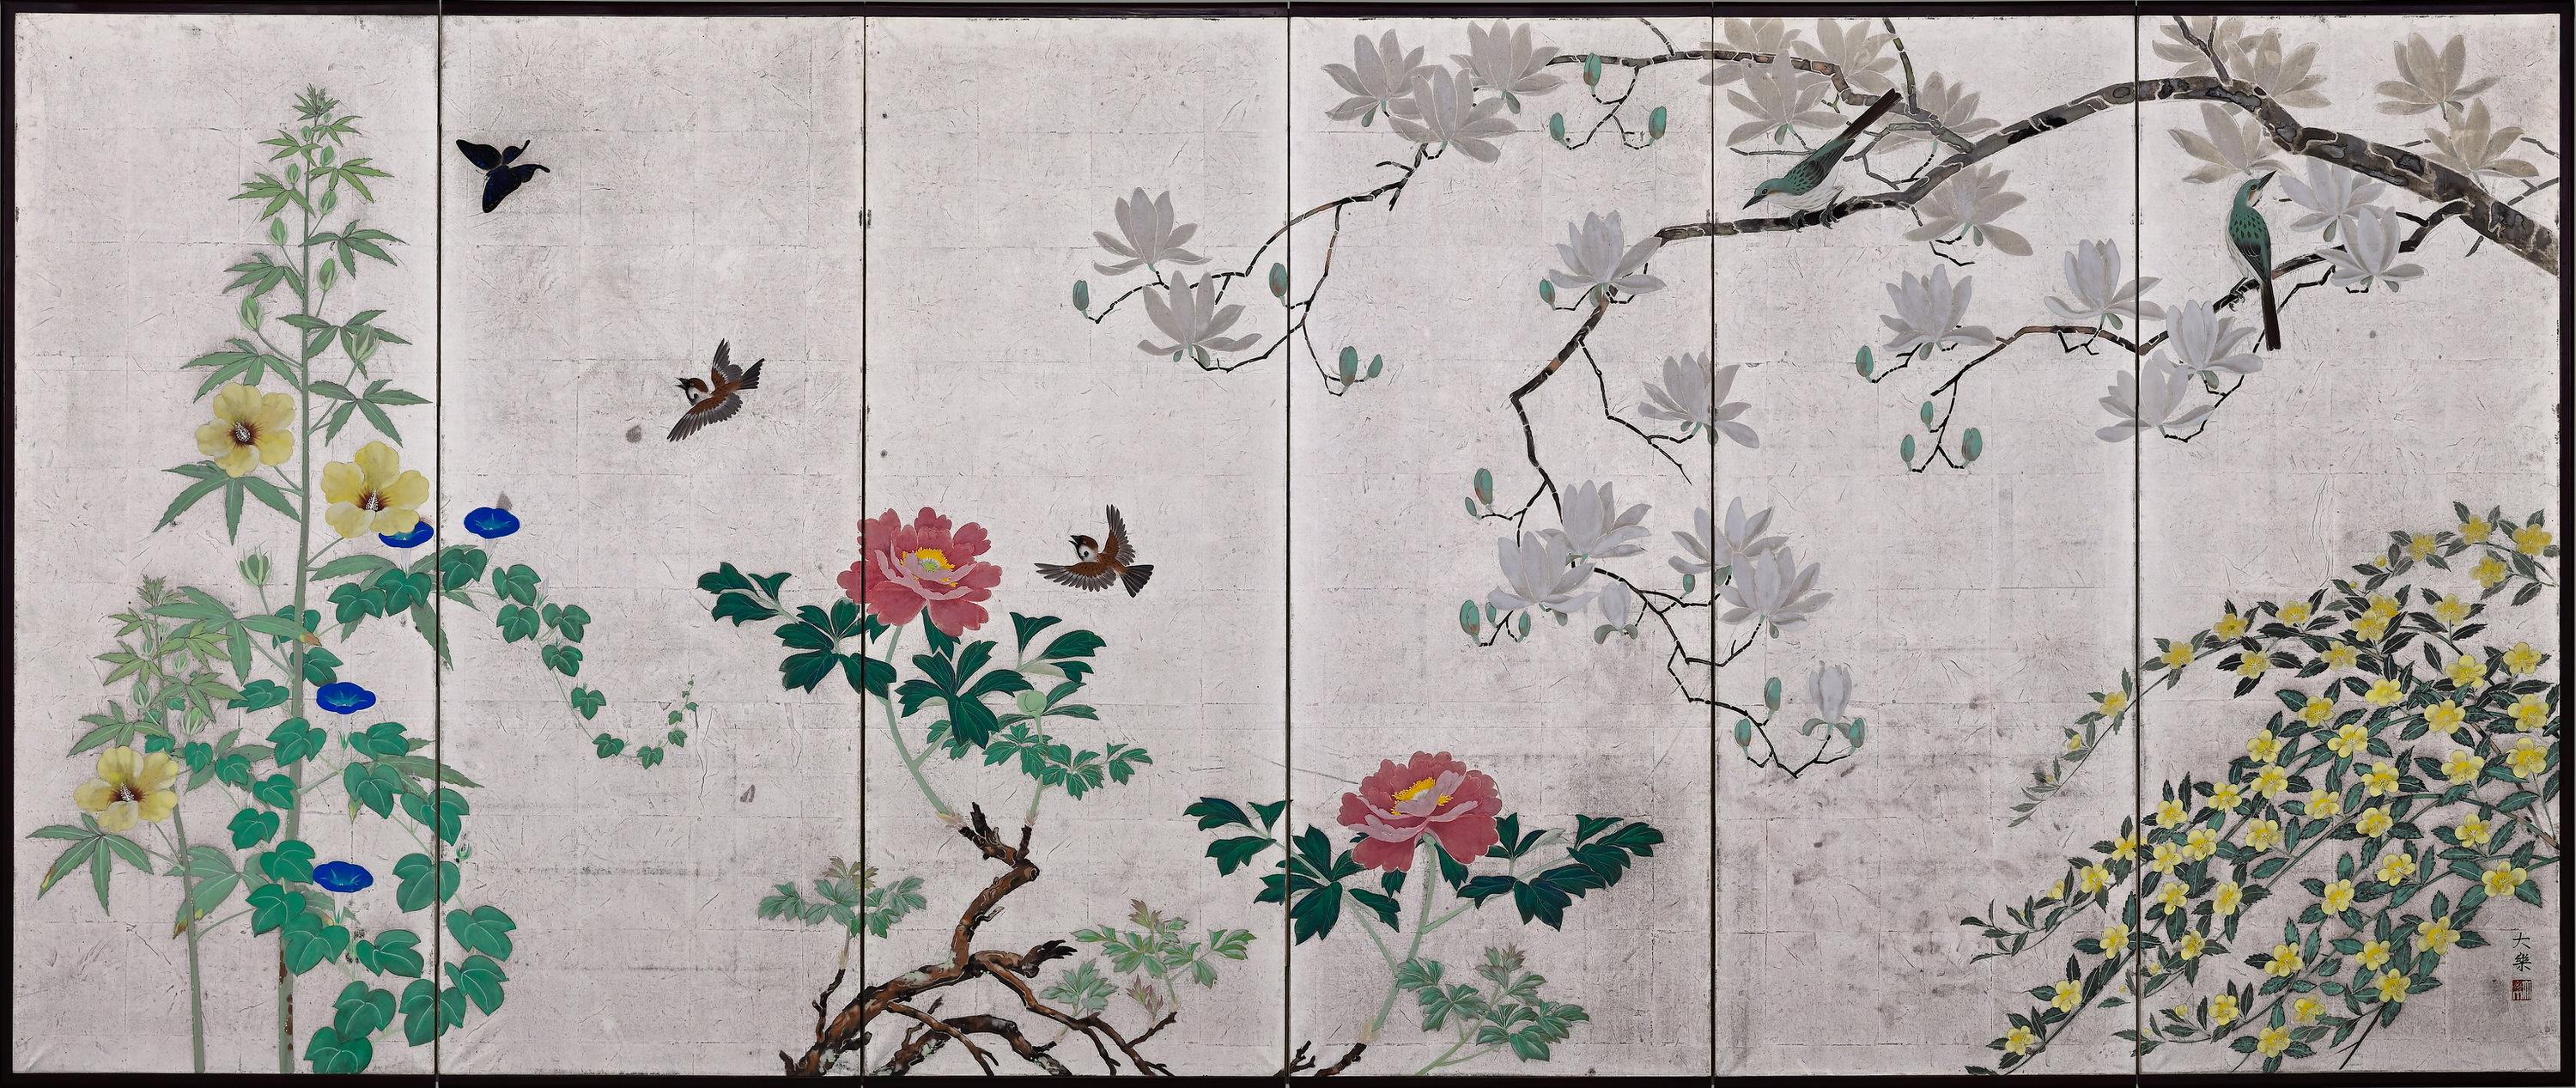 Flowers and birds of the 4 Seasons.

Early 20th century, circa 1920

Pair of six-panel Japanese folding screens.

Ink, gofun, pigment and silver leaf on paper.

Signed and sealed: 

Tairaku

Dimensions:

Each Screen W. 284 cm x H. 121